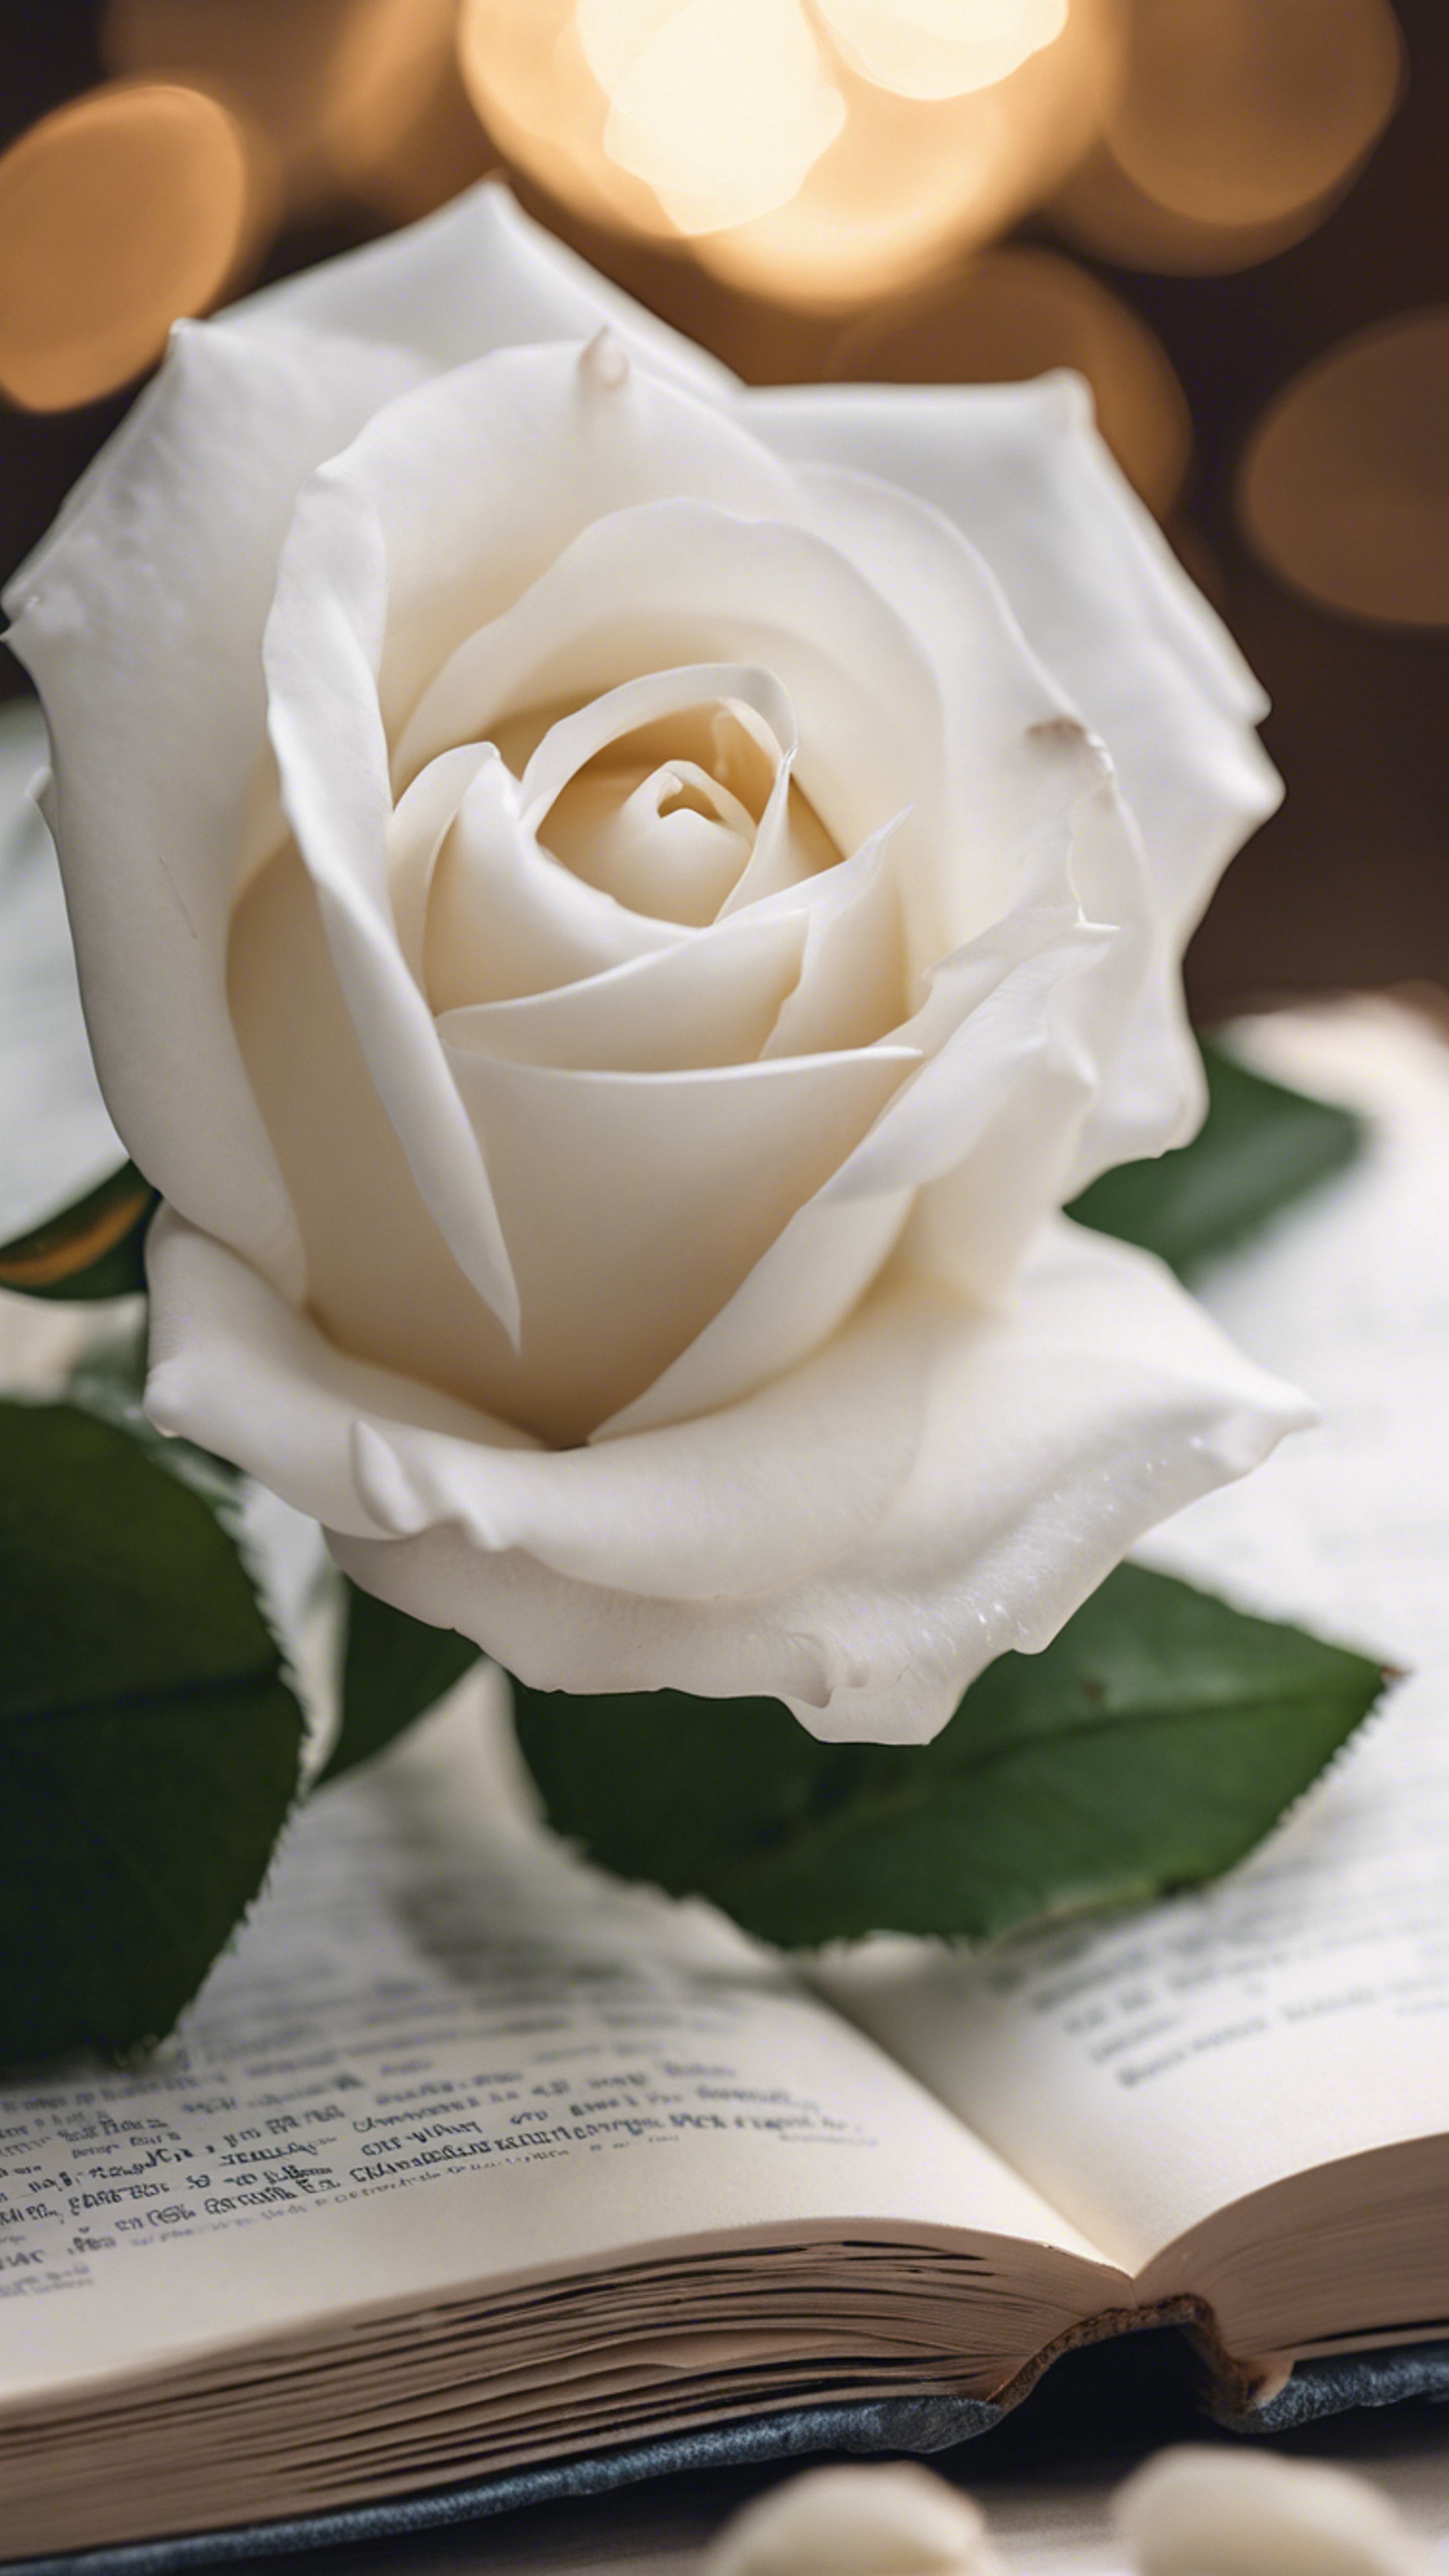 A serene white rose perched on an open hardcover book. Hintergrund[5eeaaa5d95634df1b3fb]